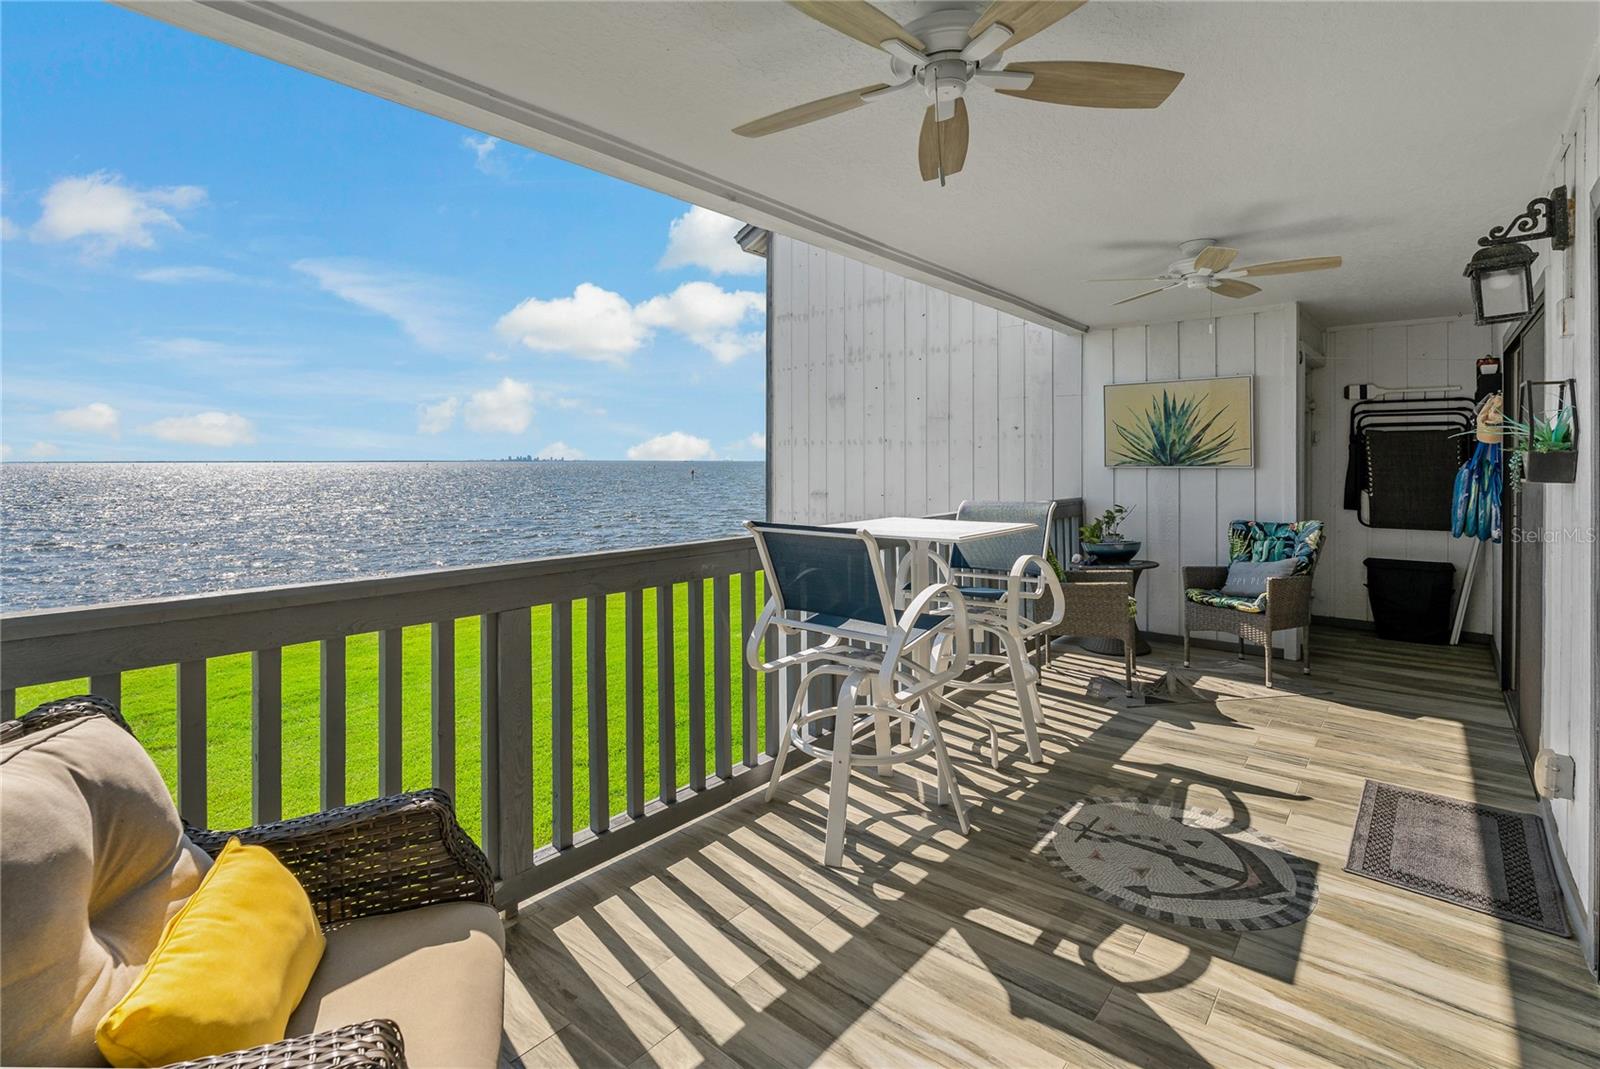 OPEN VIEWS OF TAMPA BAY!